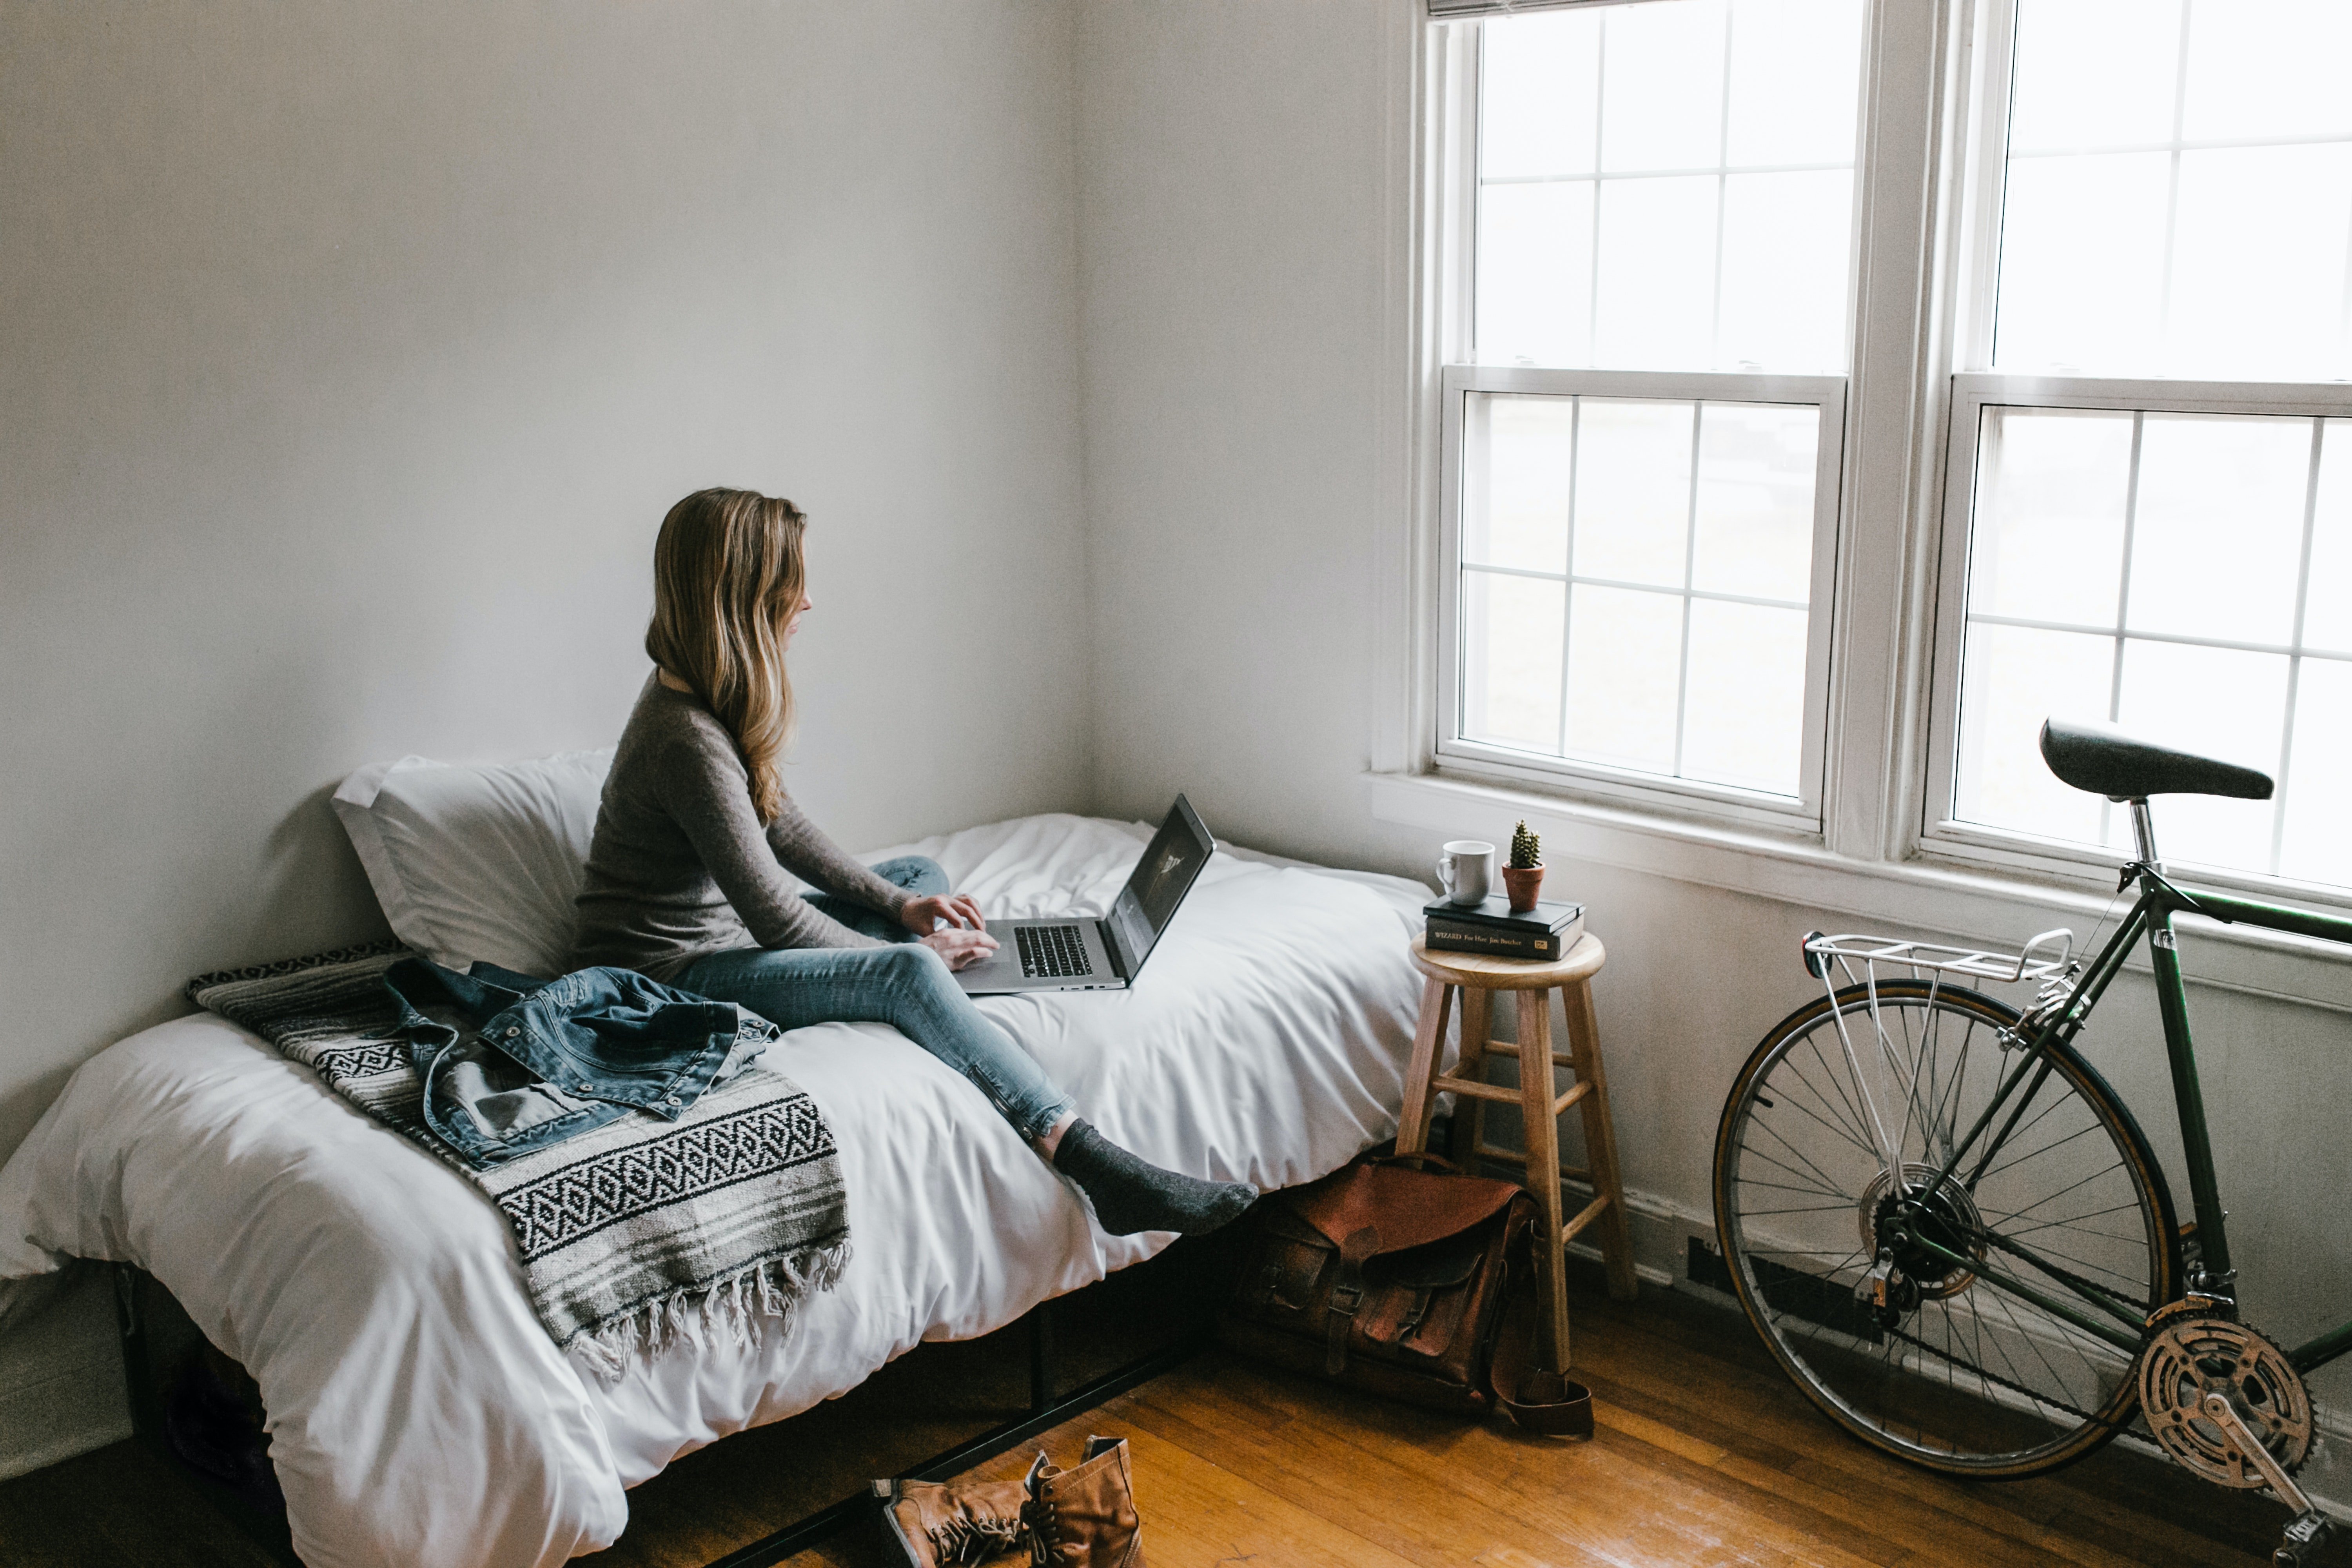 5 Perks of Living in an Apartment VS a College Dorm